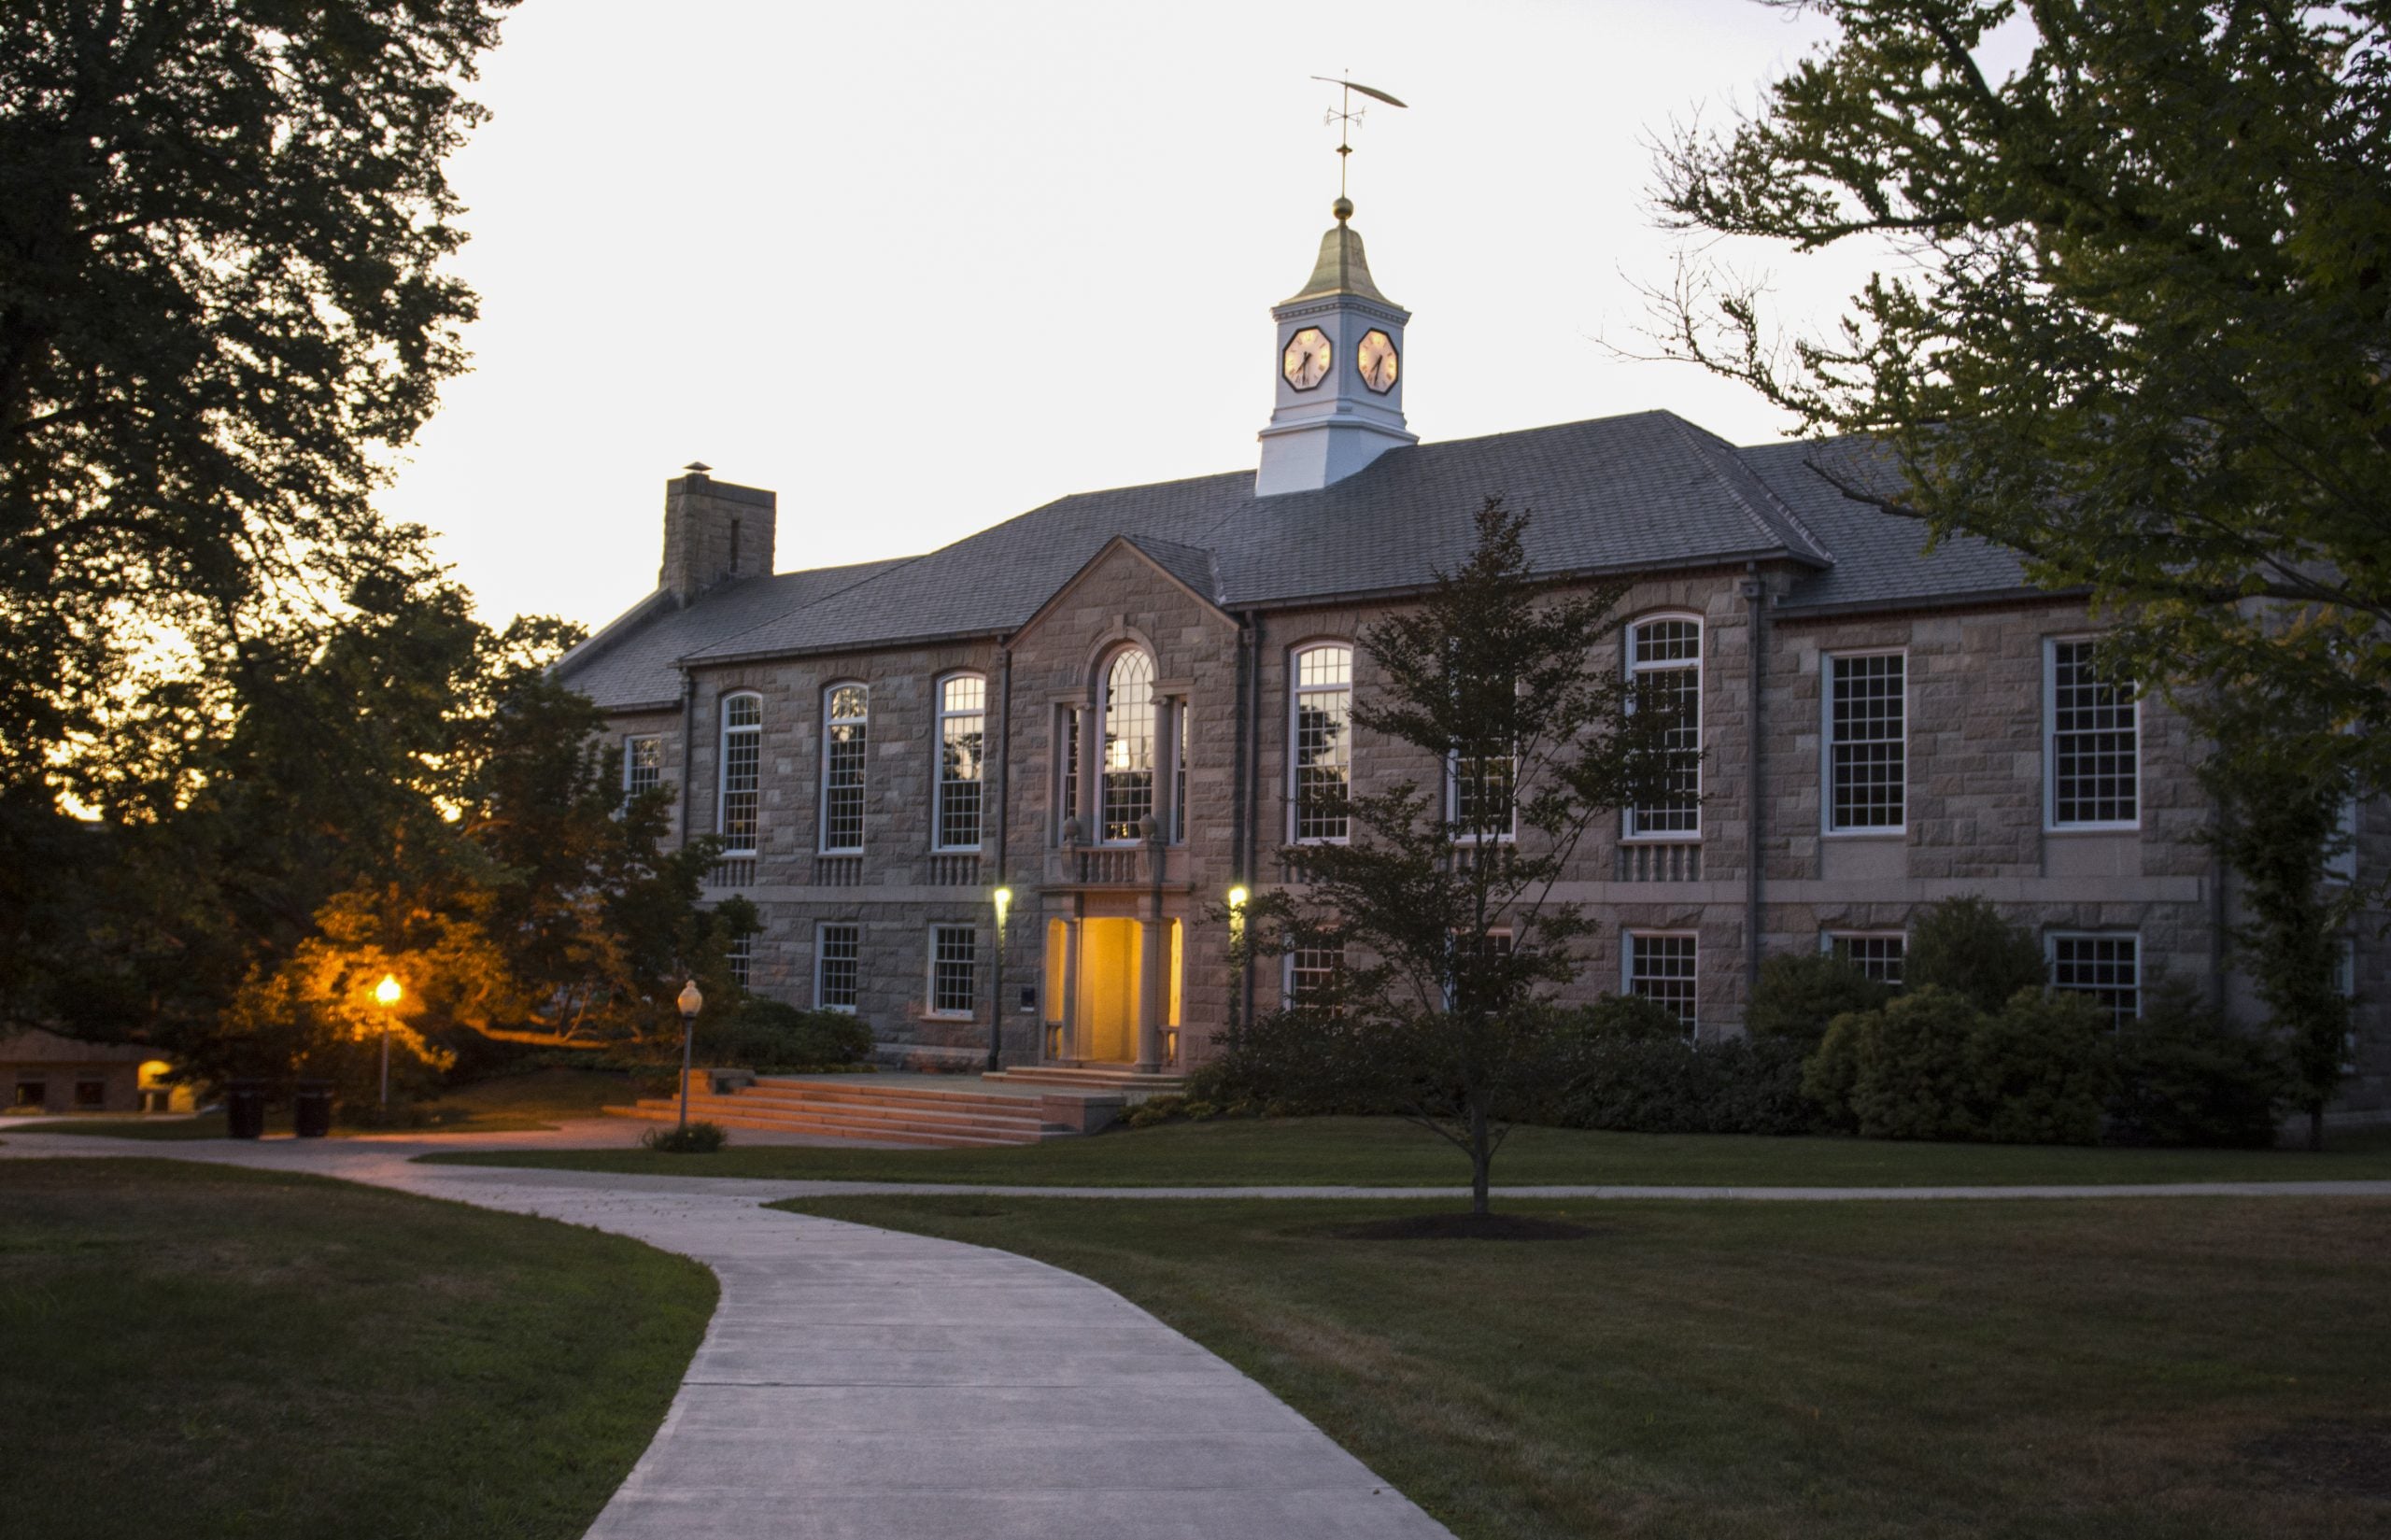 Green Hall, a stone building at the University of Rhode Island, pictured at night with the sunset above